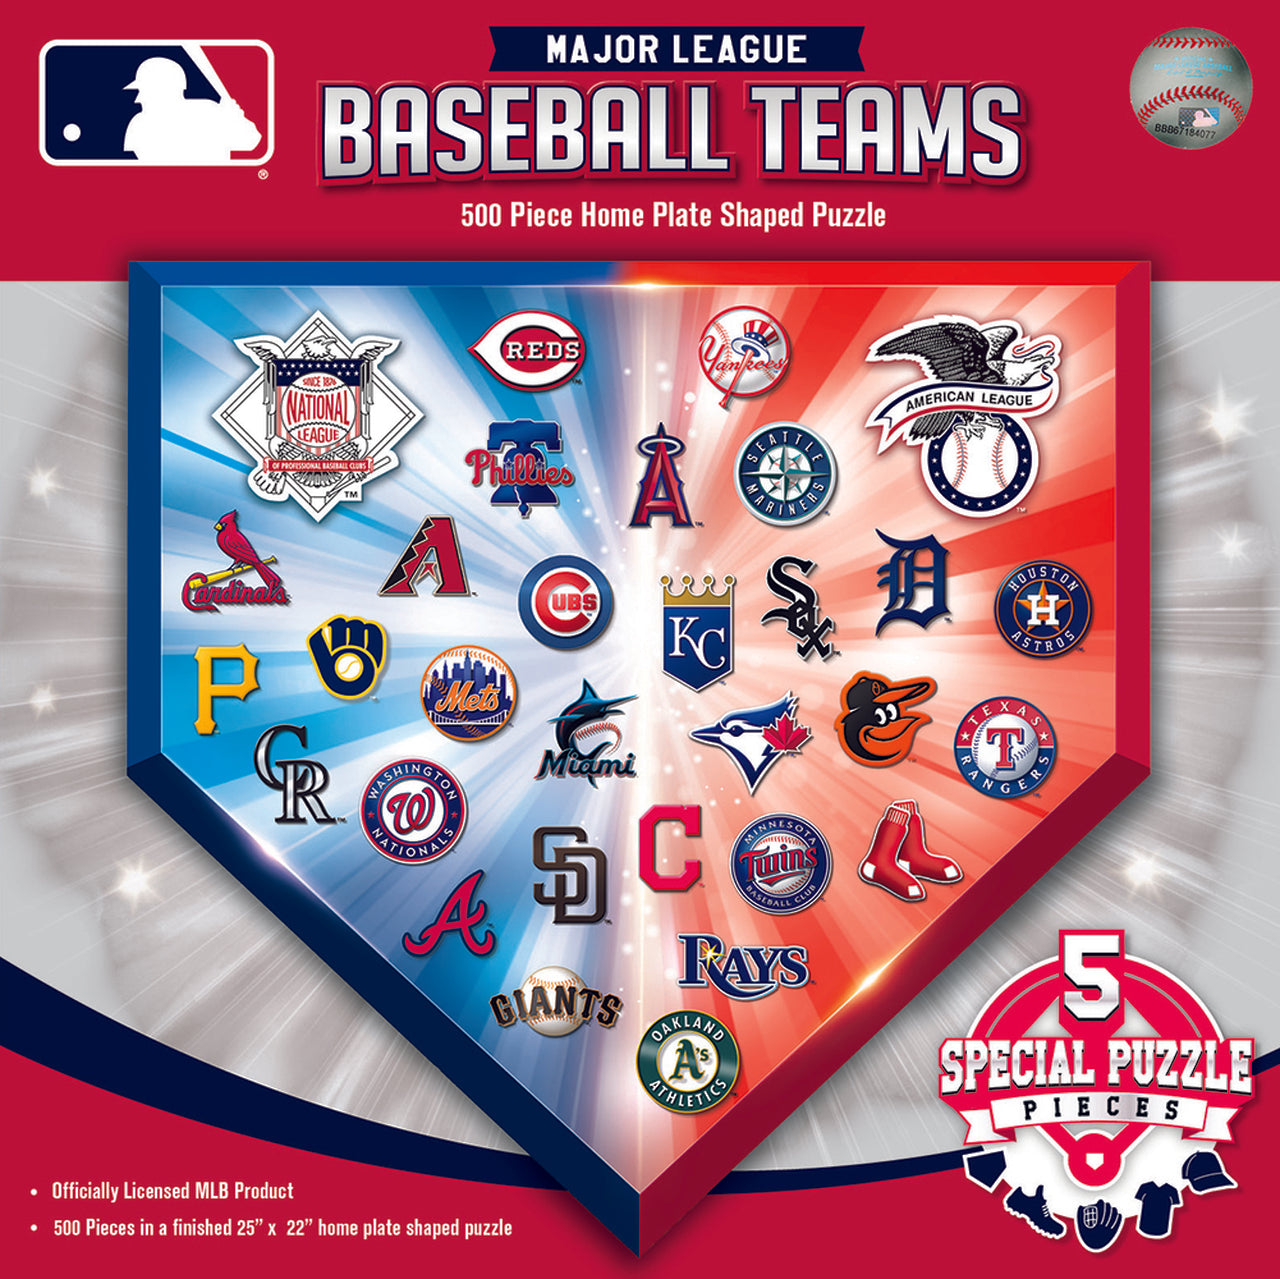 MLB TEAM LOGOS - HOME PLATE SHAPED 500 PIECE JIGSAW PUZZLE